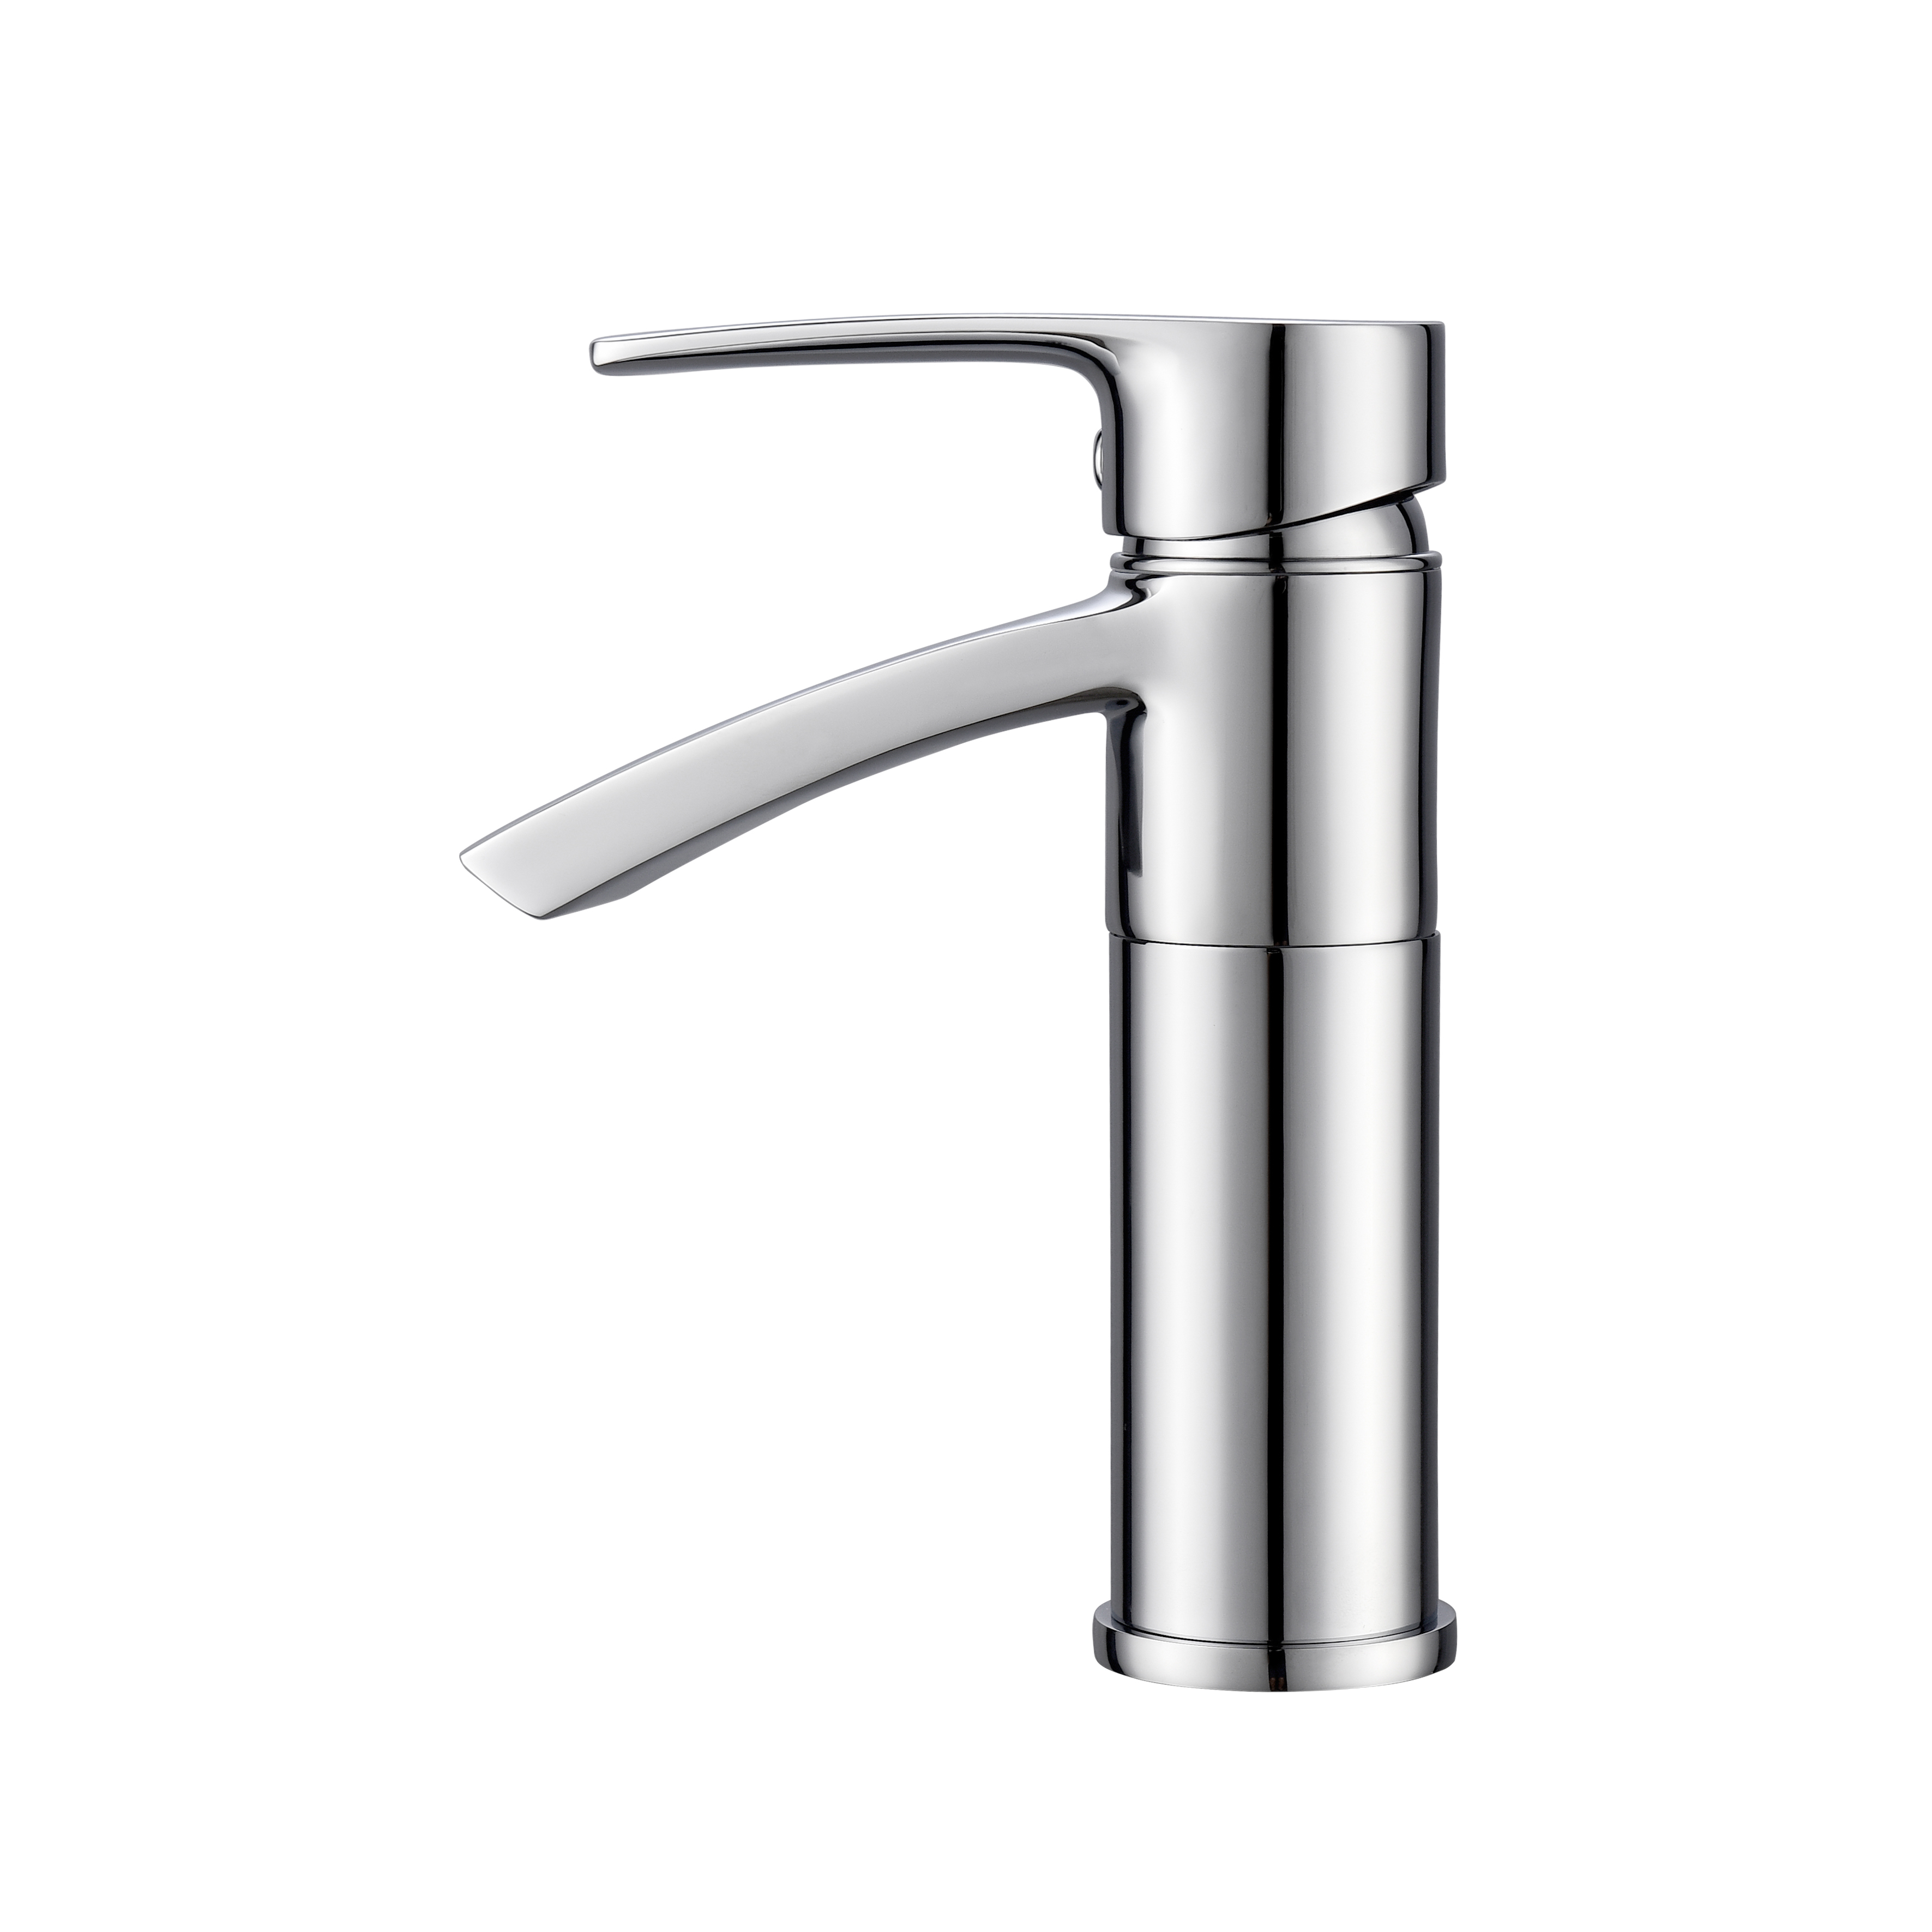 Wholesale High Quality Modern Widespread Deck Mounted Brass cUPC Basin Taps Bathroom Faucet